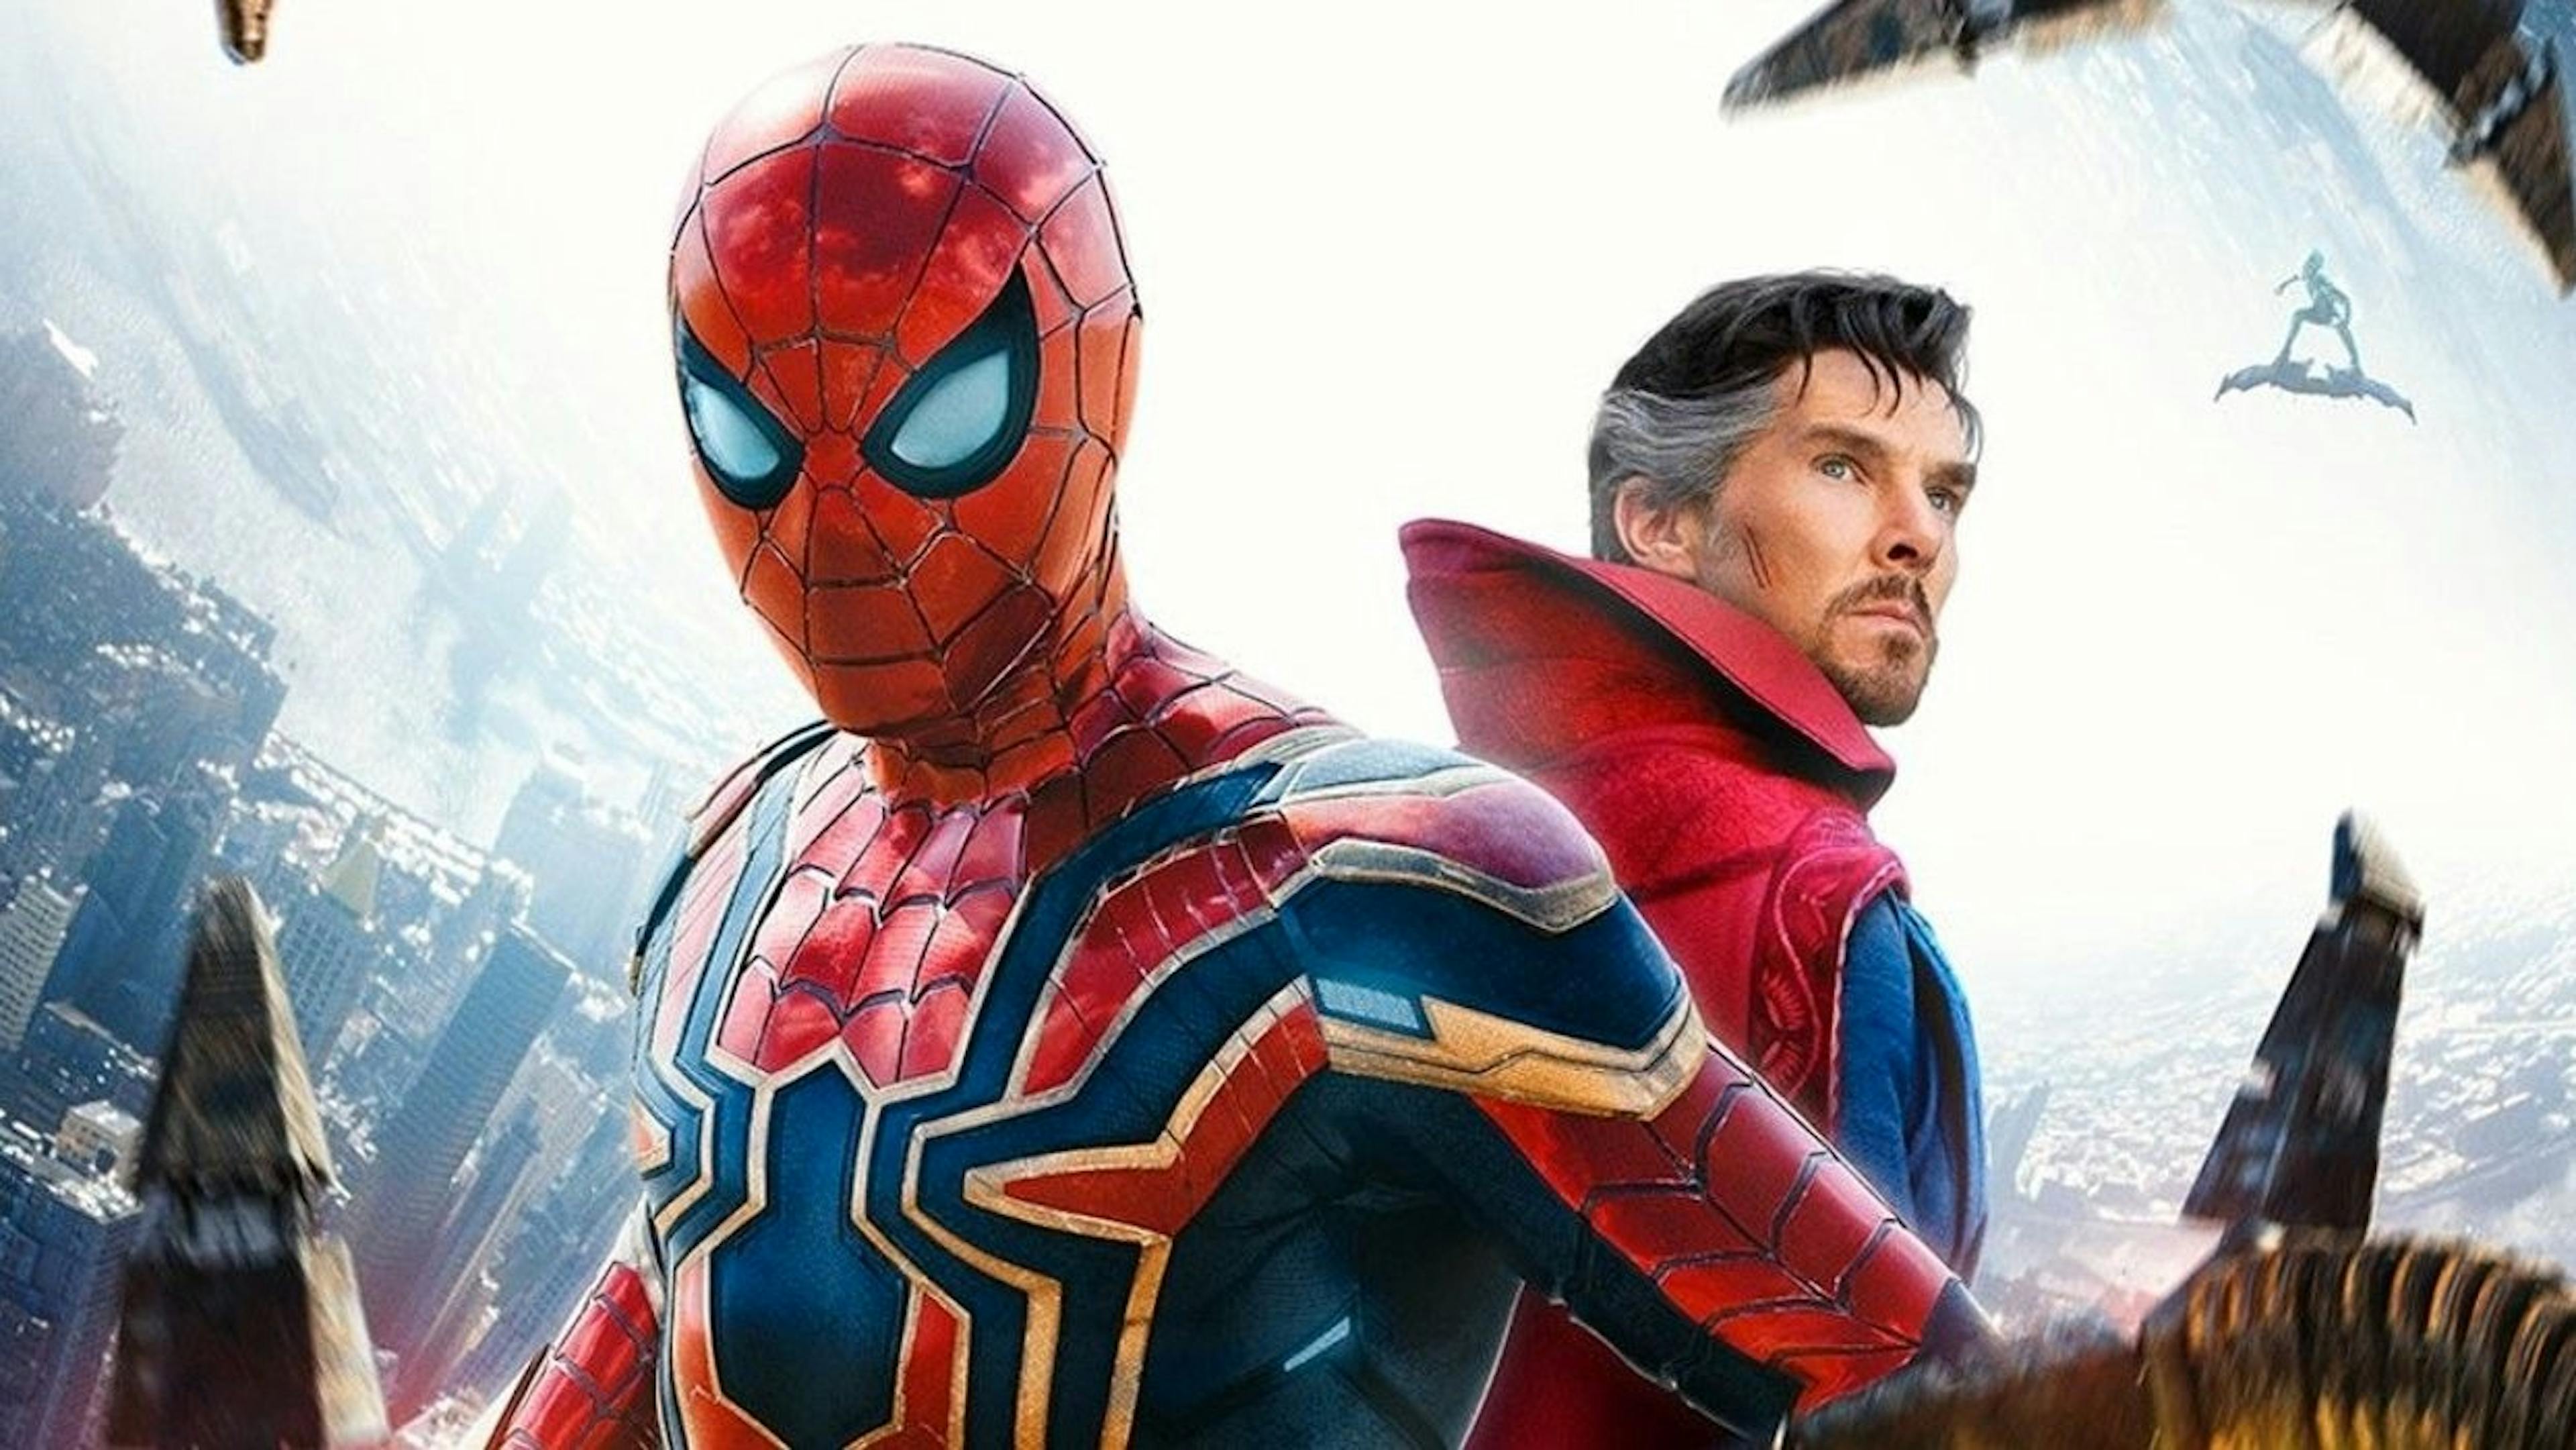 https://www.techradar.com/news/when-is-spider-man-no-way-home-coming-to-streaming-services